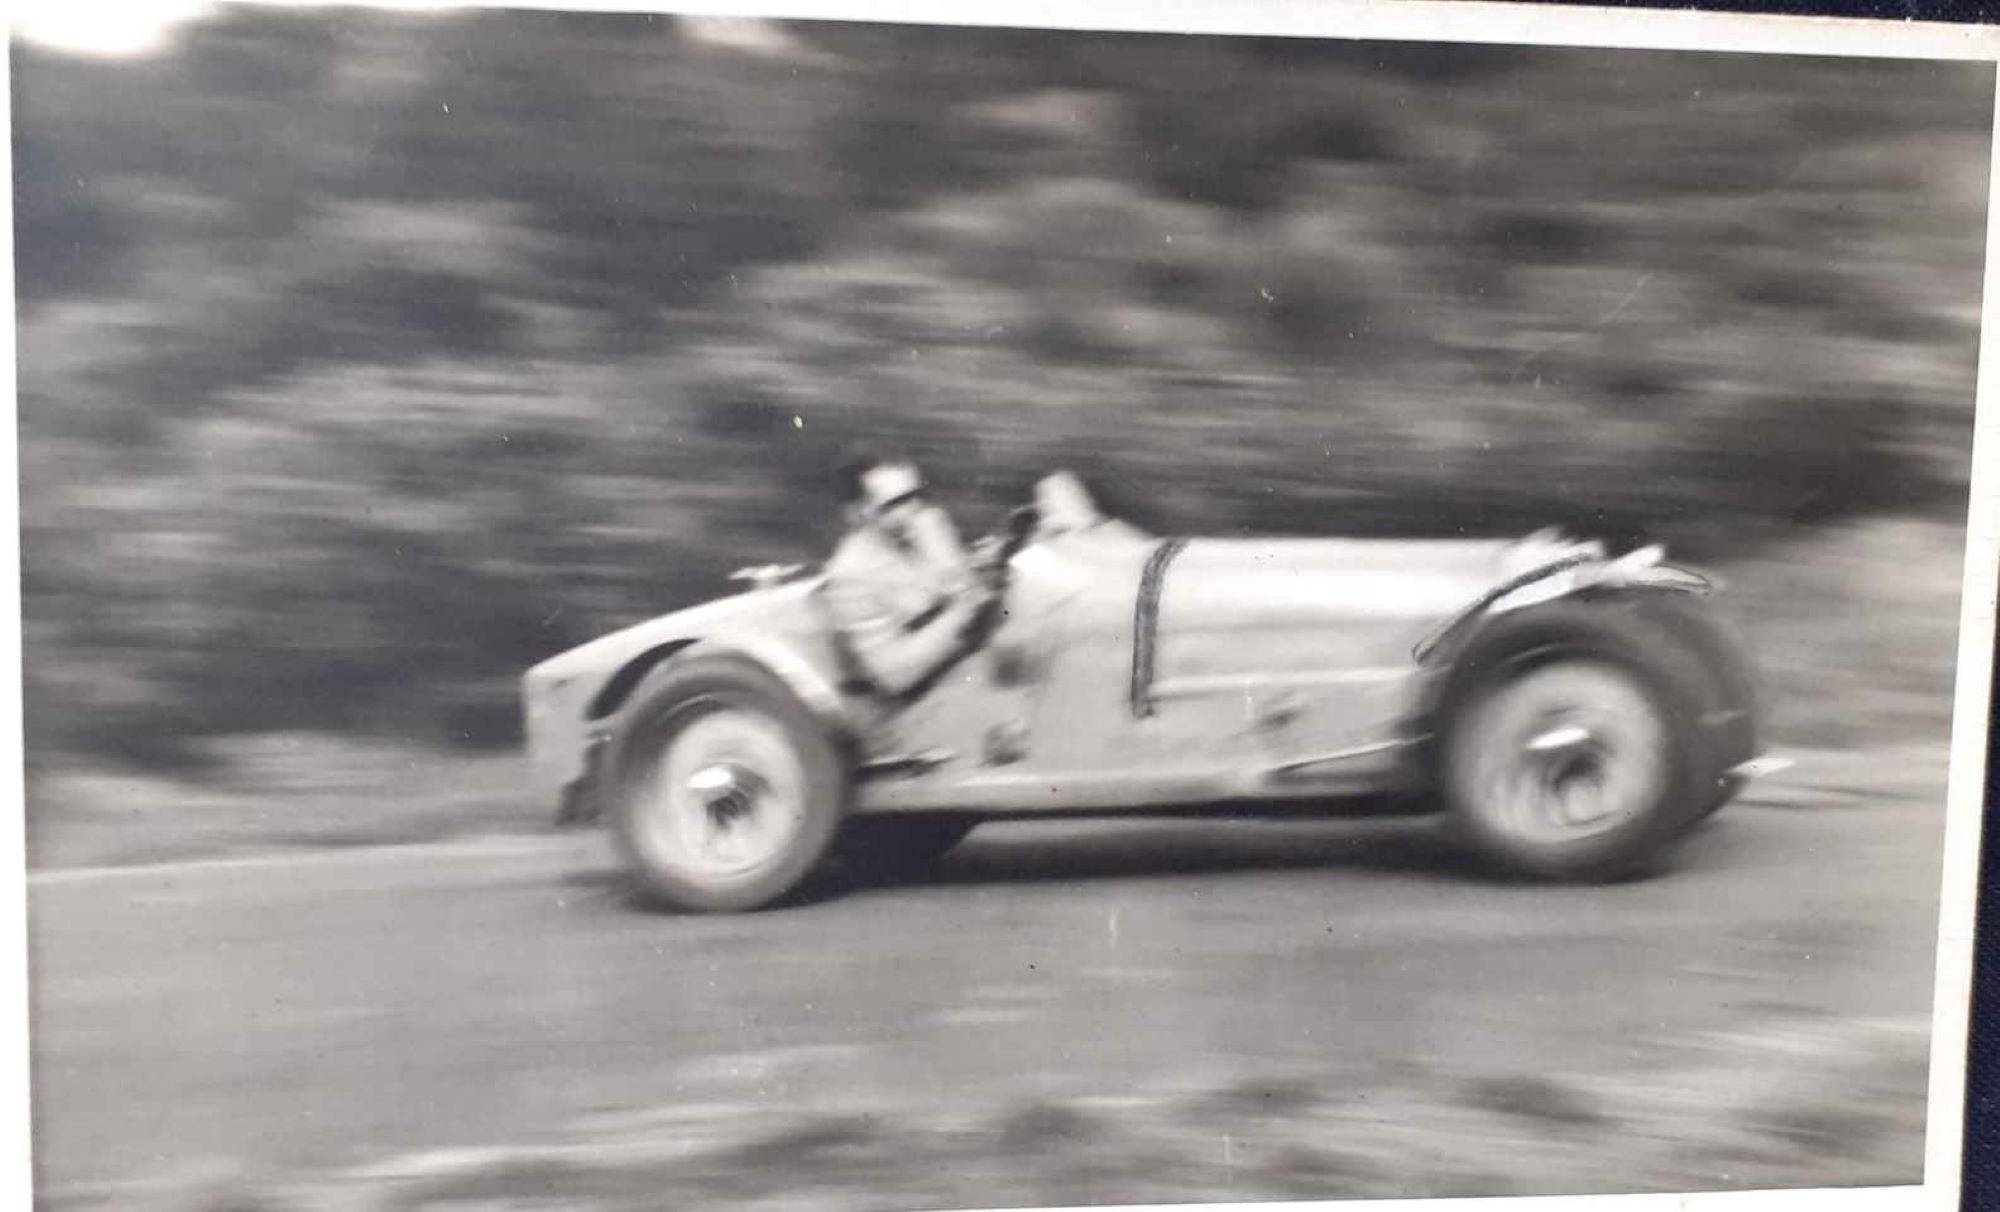 Name:  NSCC 1950 #0116 Bugatti T35 at speed - light colour 1950's - image Graeme Wells arch Anthony Wel.jpg
Views: 213
Size:  158.1 KB